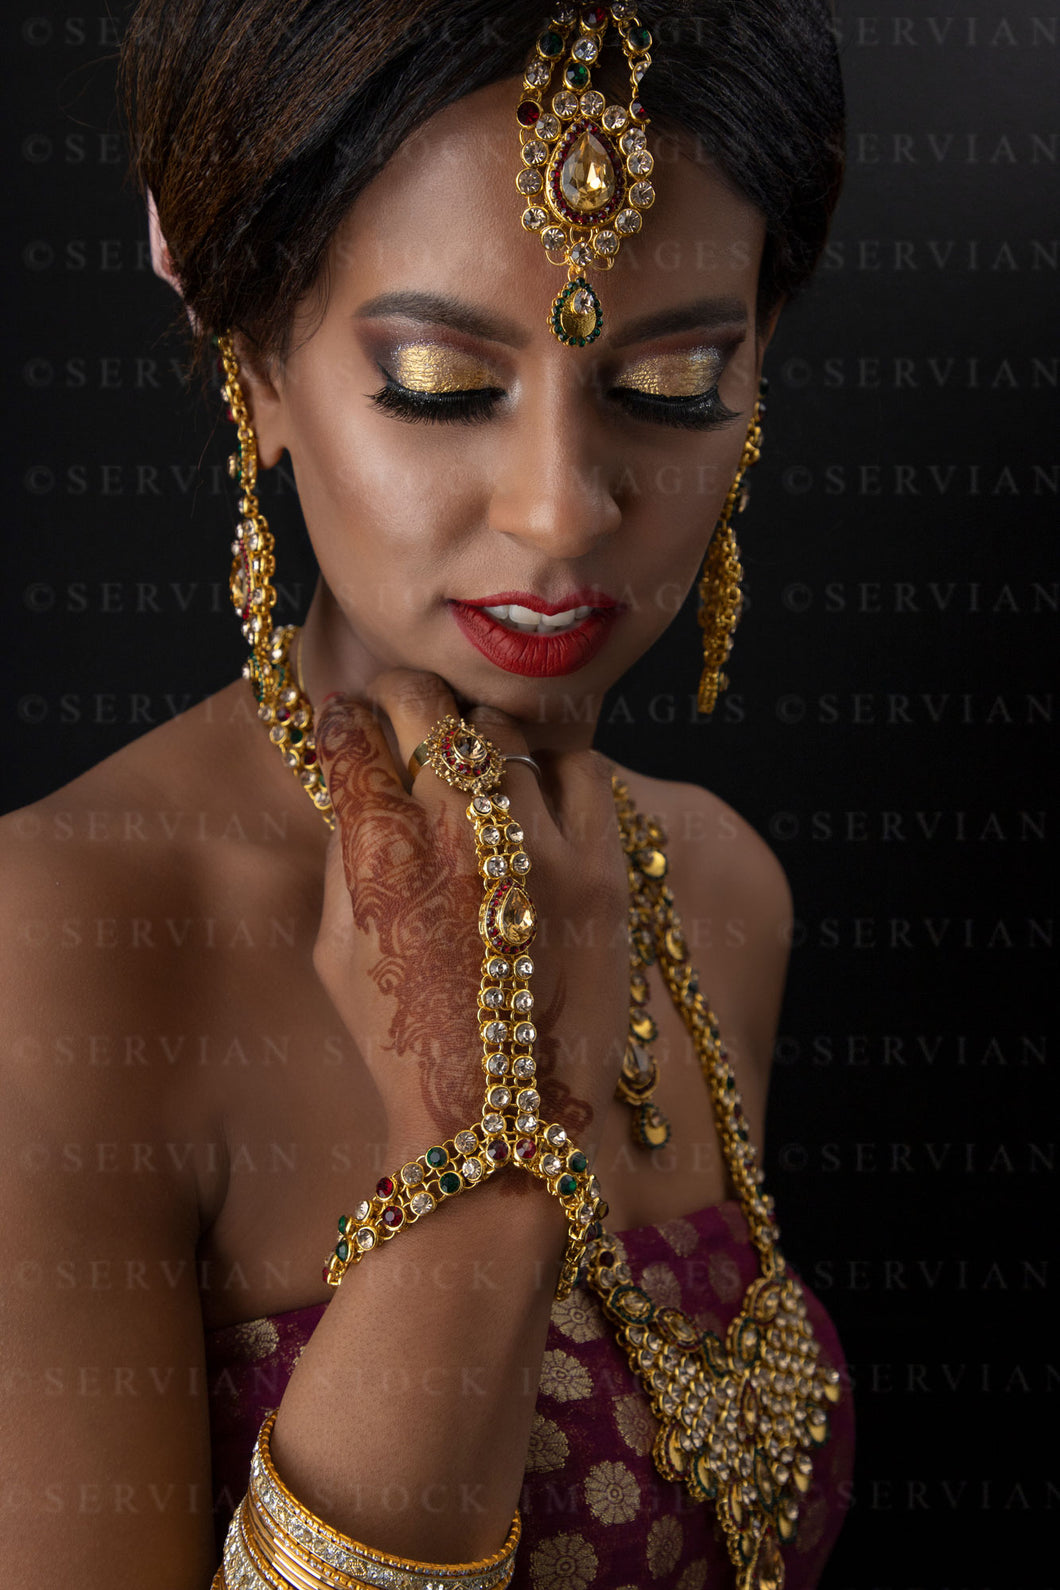 Woman wearing a sari and gold jewellery against a black backdrop (Shelaila 4358)